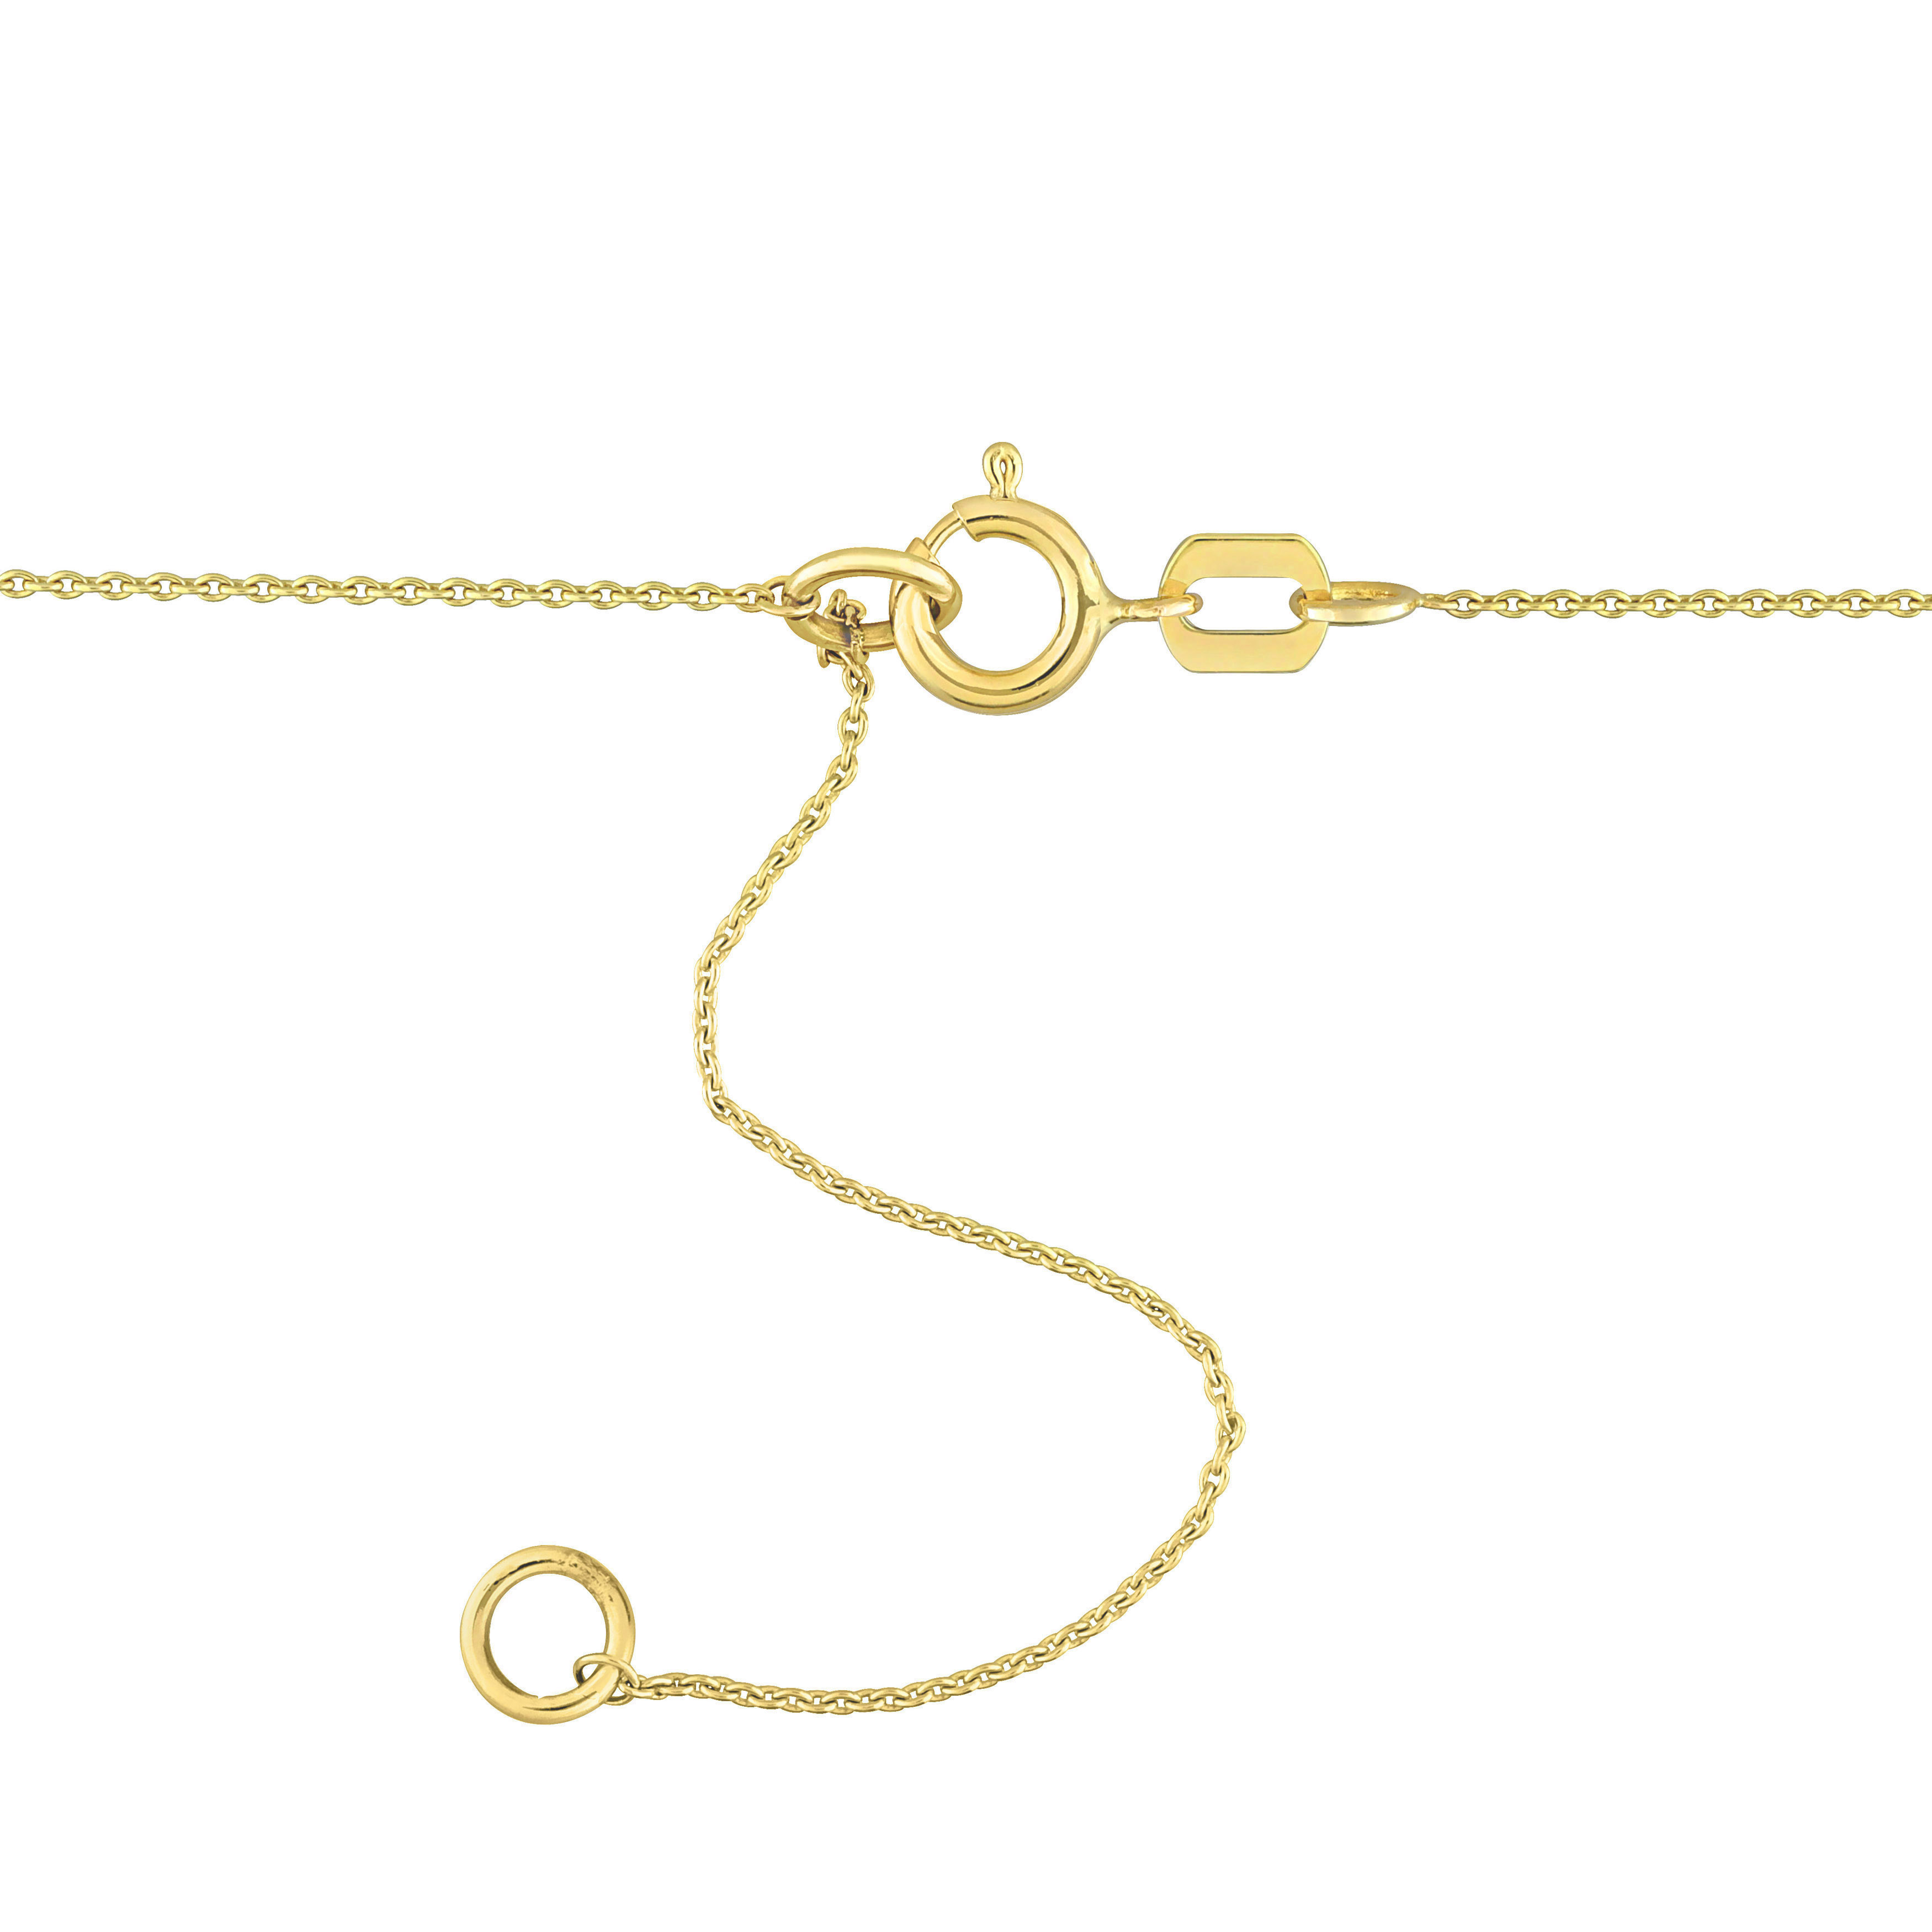 3-3.5 MM Freshwater Cultured Pearl and 1/10 CT TDW Diamond Station Drop Necklace in 10k Yellow Gold - 16+2 in.